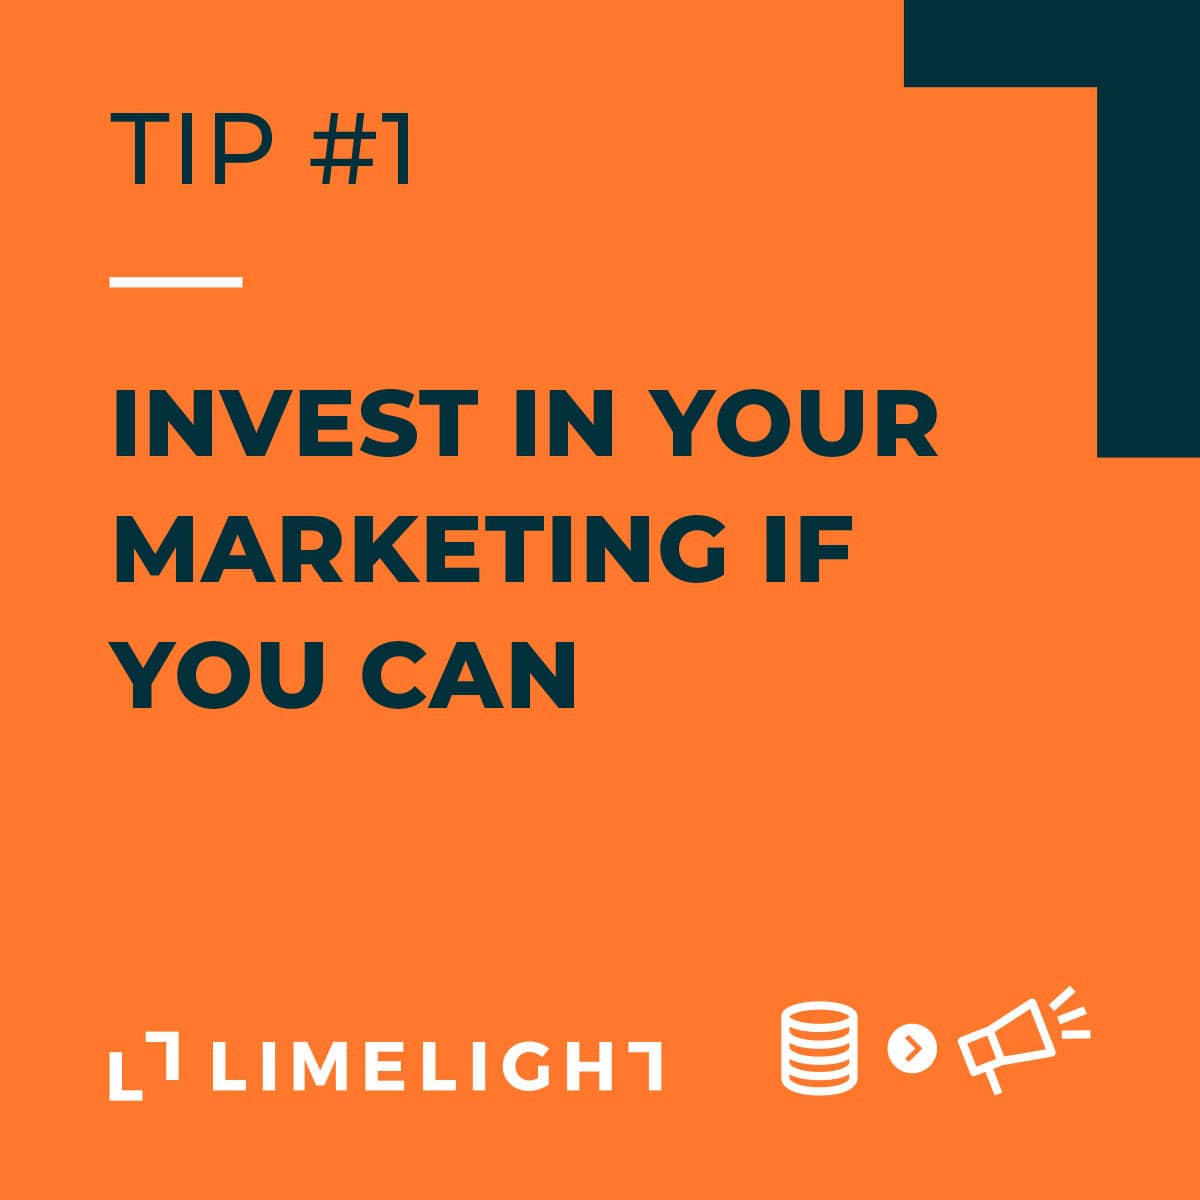 Tip 1: Invest in your marketing if you can